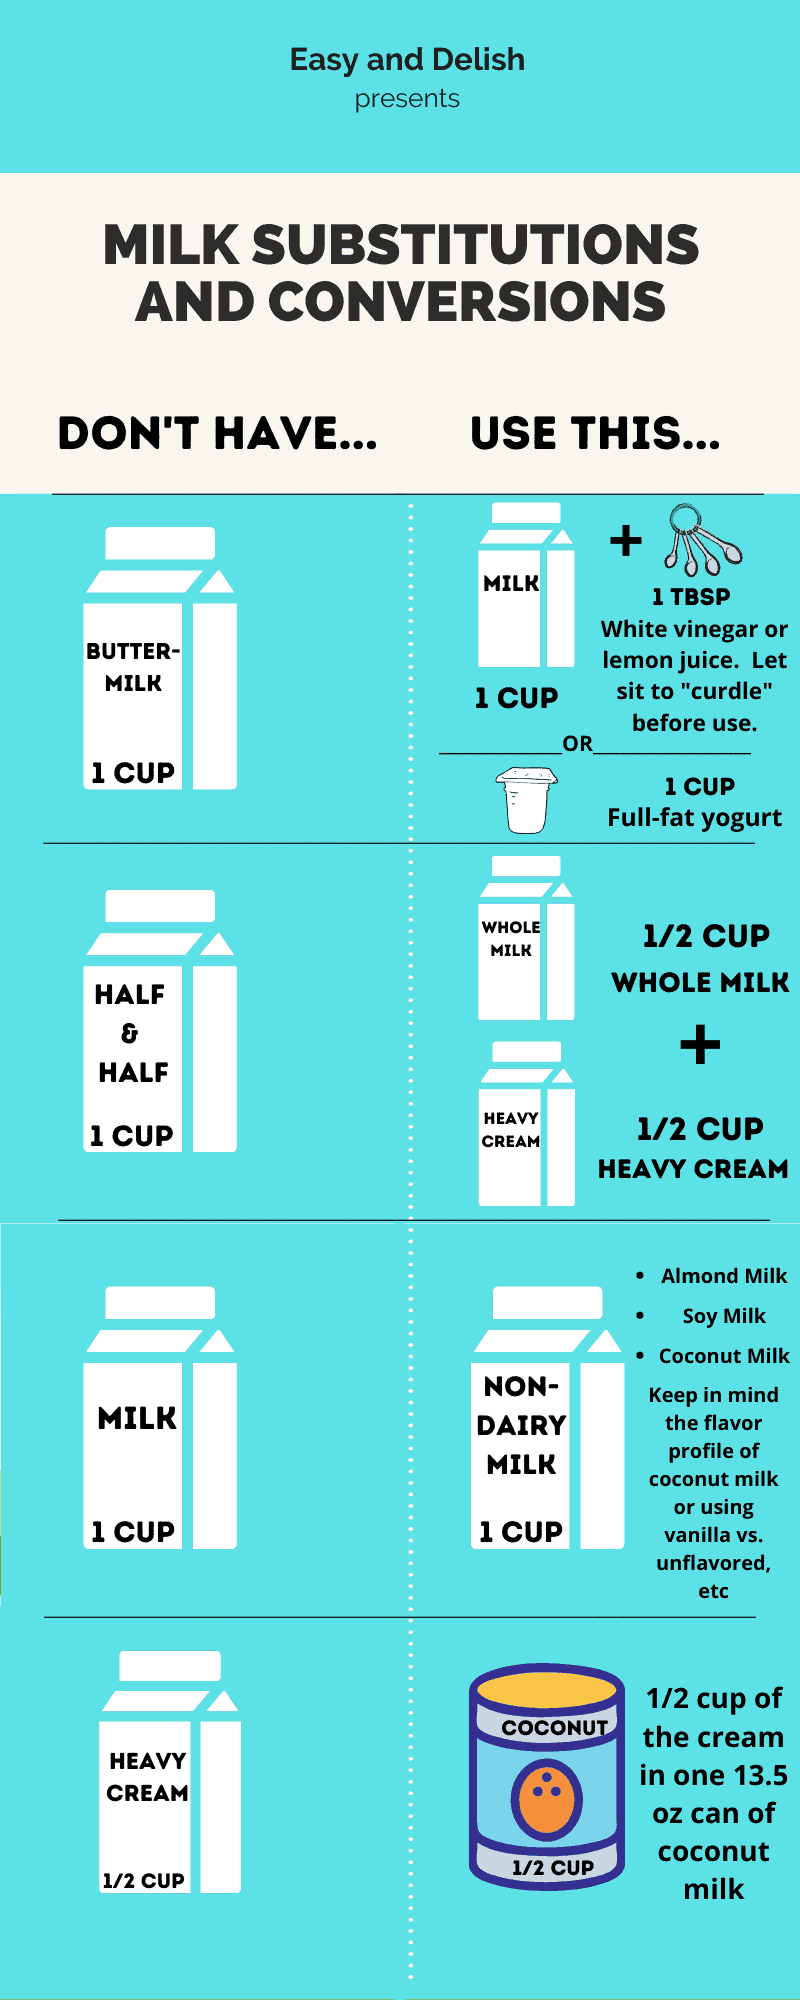 MILK Substitutions And Conversions Infographic Final 